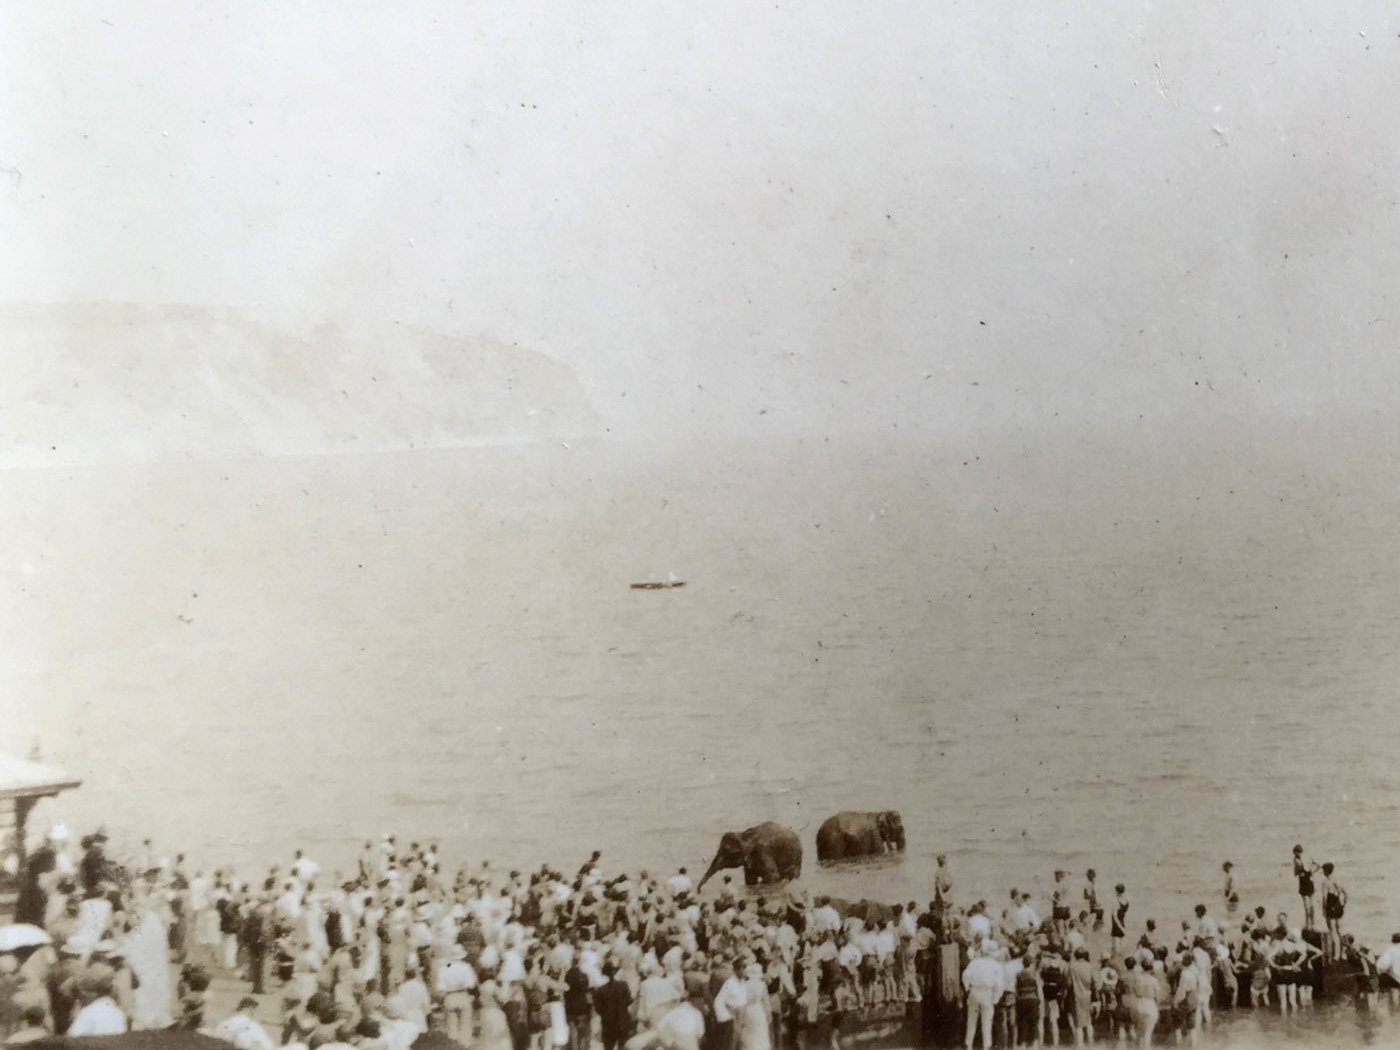 Elephants in the sea at Swanage